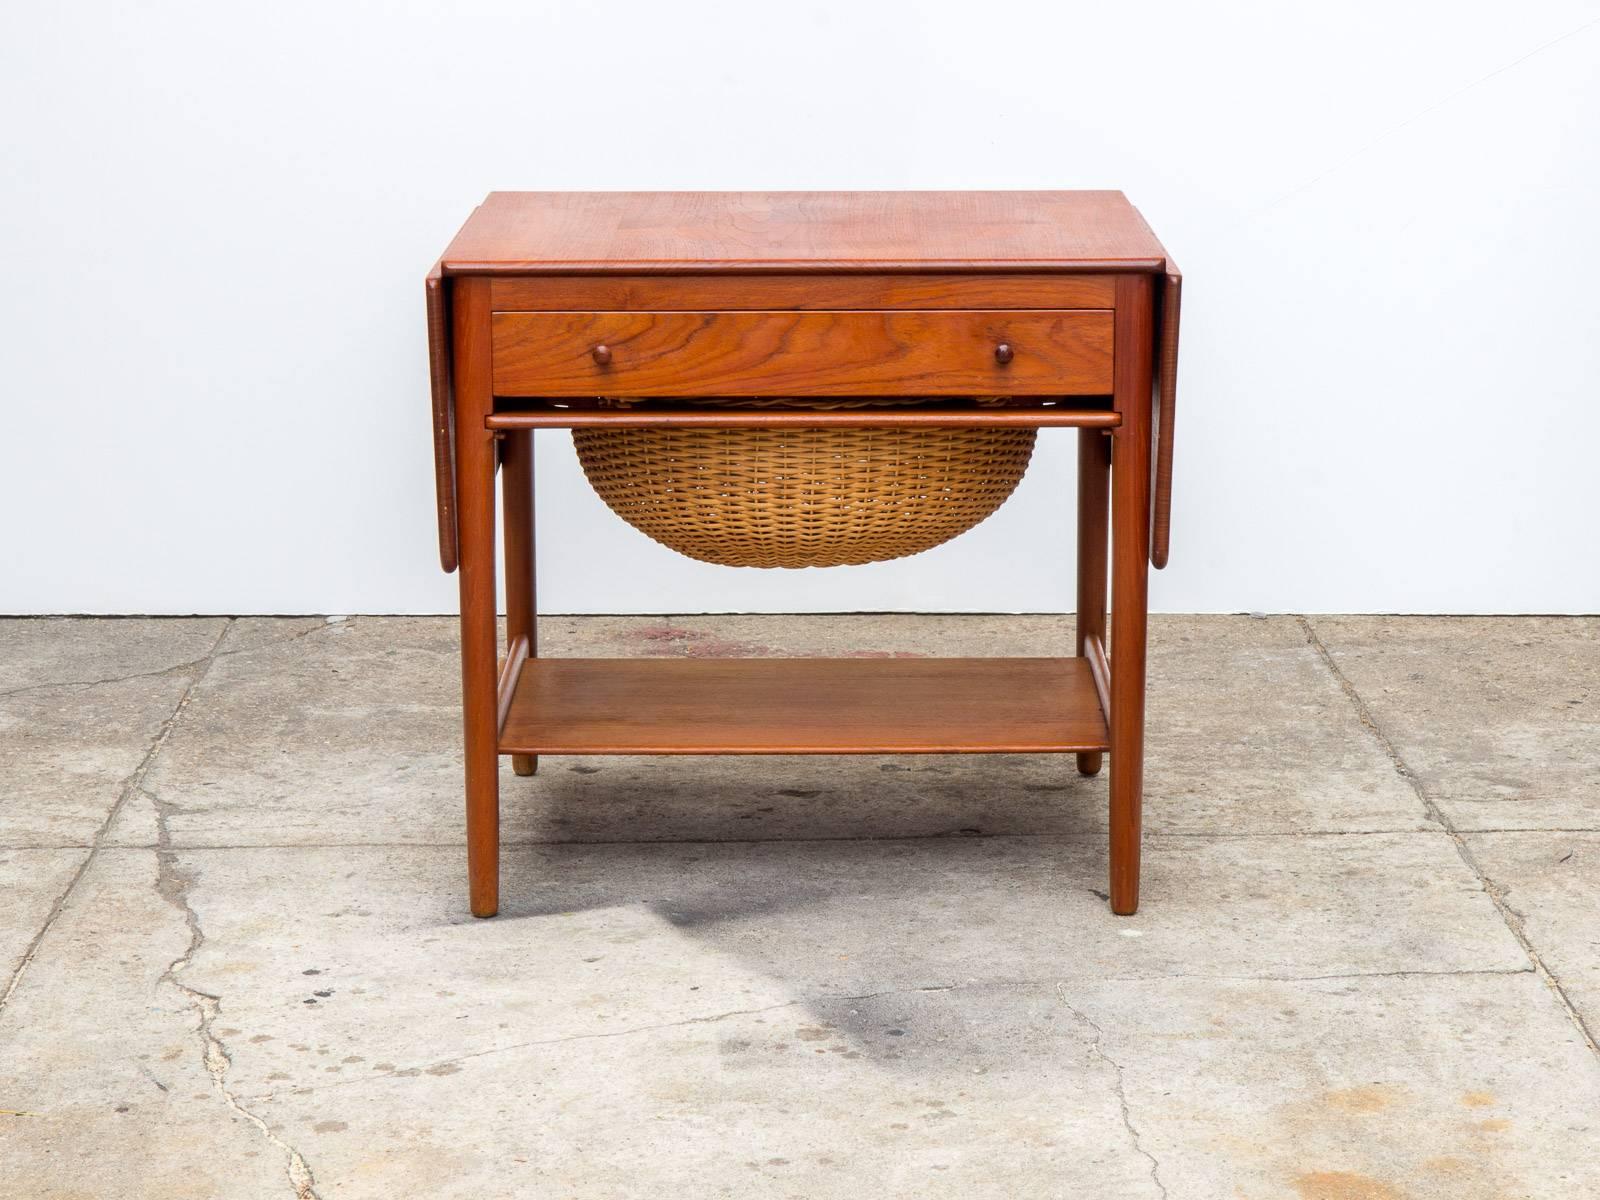 The AT-33 is a marvelous example of Hans J. Wegner design and Andreas Tuck craftsmanship, this sewing table features drop leaves, a beautiful wicker basket and deep oak drawer with spindles and divisions for thread and other supplies. This is an